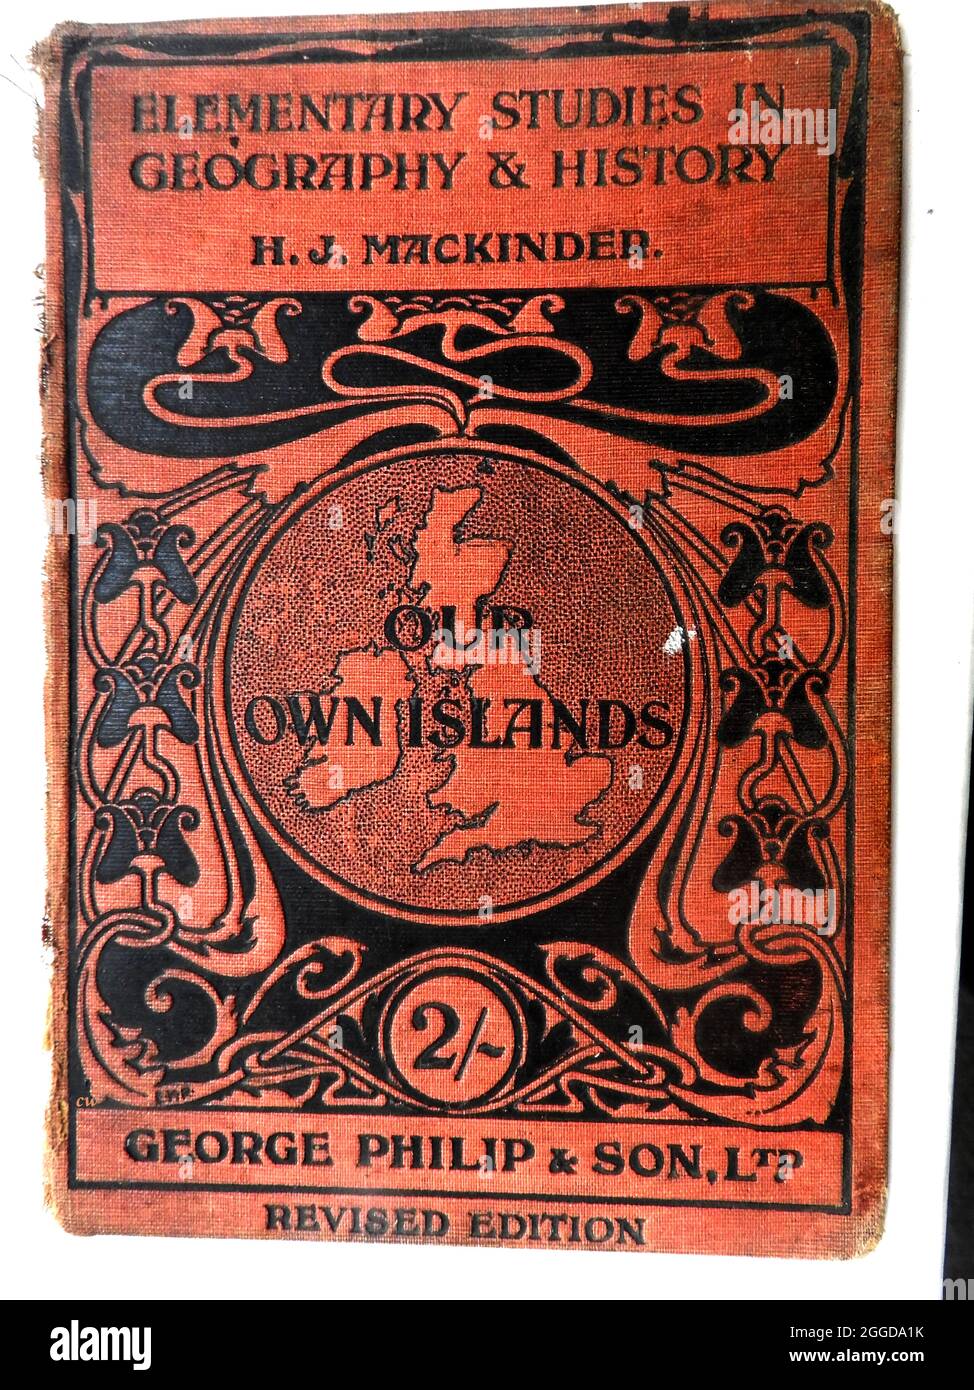 A 1914 British school geography book cover 'OUR OWN ISLANDS Elementary studies in Geography & History'.   --   A revised hardback edition published by George Philip and son Ltd (editor H J Mackinder). The publishing house was founded by George Philip (1800–1882)  who was a cartographer and  map publisher. It sold at 2/- (two shillings) a copy at the start of WWI. Stock Photo